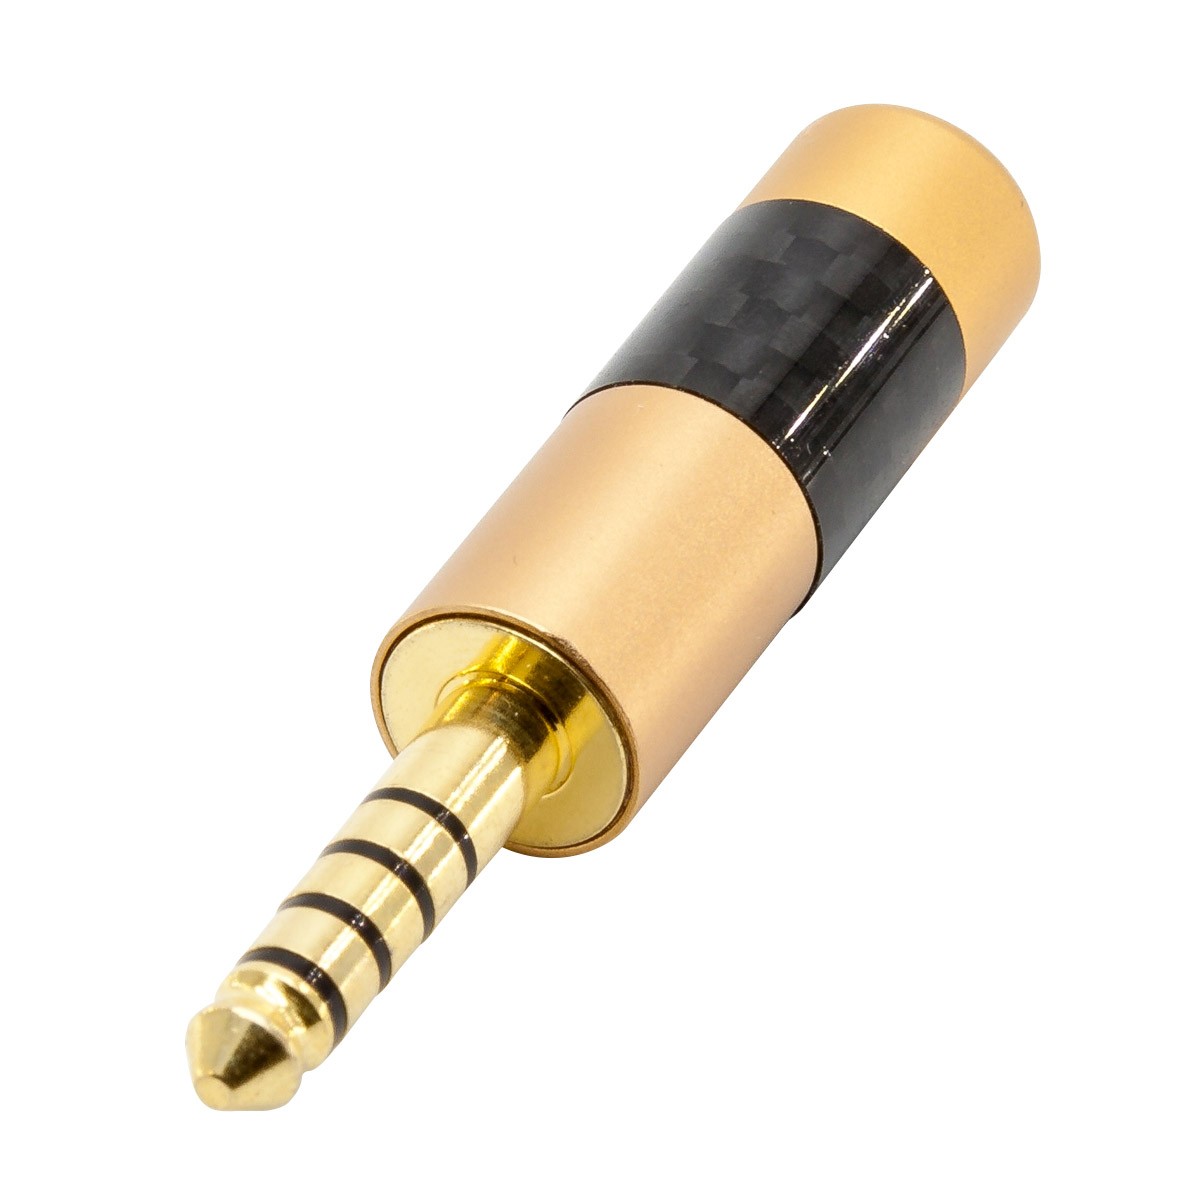 IBASSO CA02 Balanced Adapter Female Jack 2.5mm to Male Jack 4.4mm Gold Plated